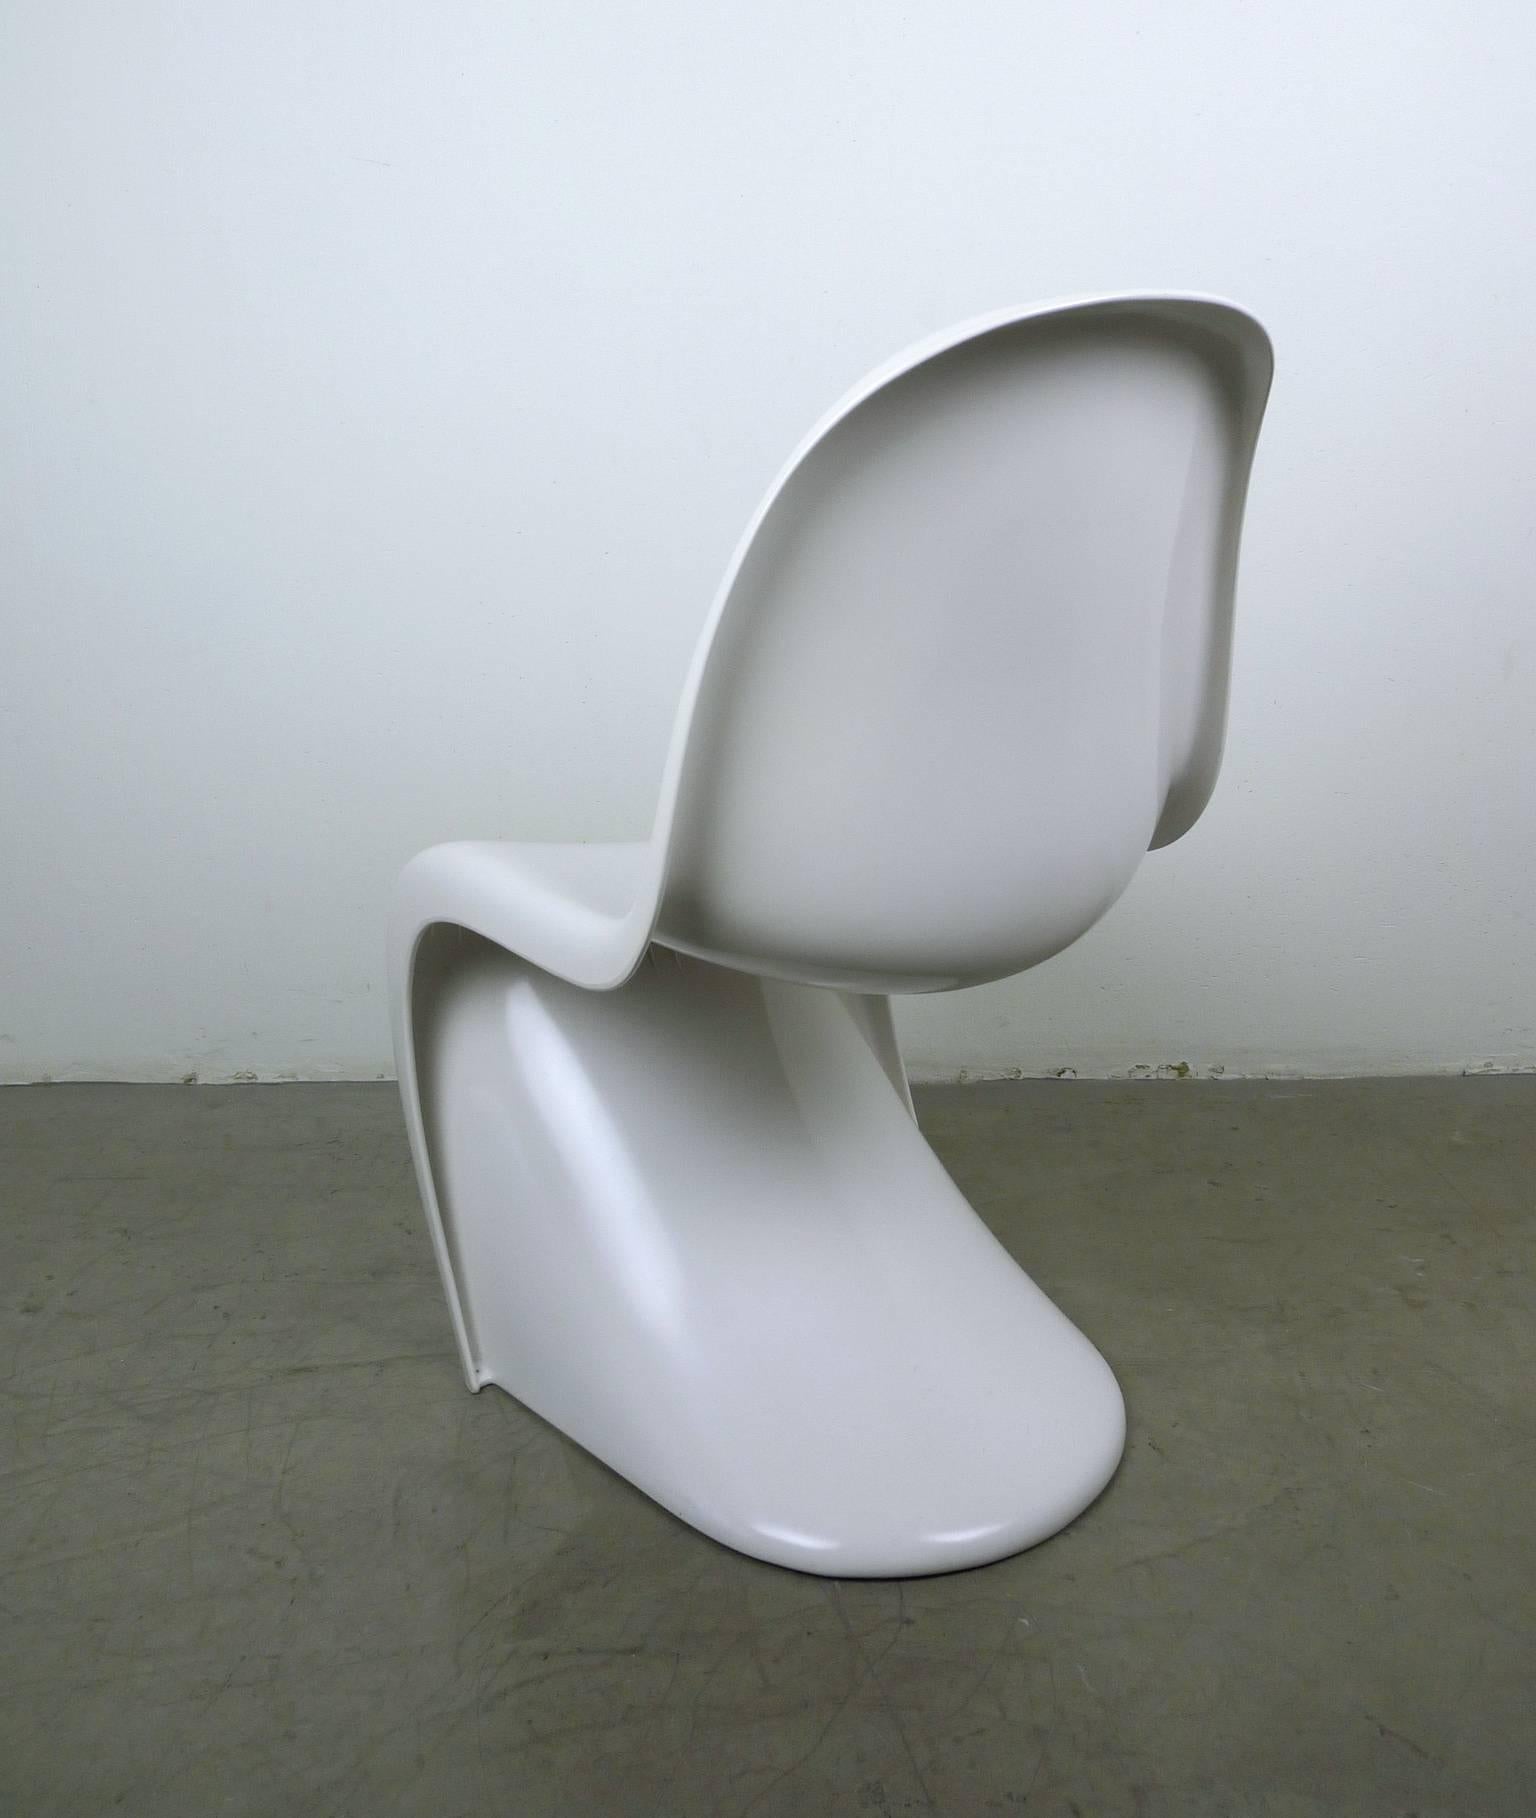 Polystyrene Set of Four White Panton Chairs by Verner Panton for Fehlbaum, Germany, 1971 For Sale